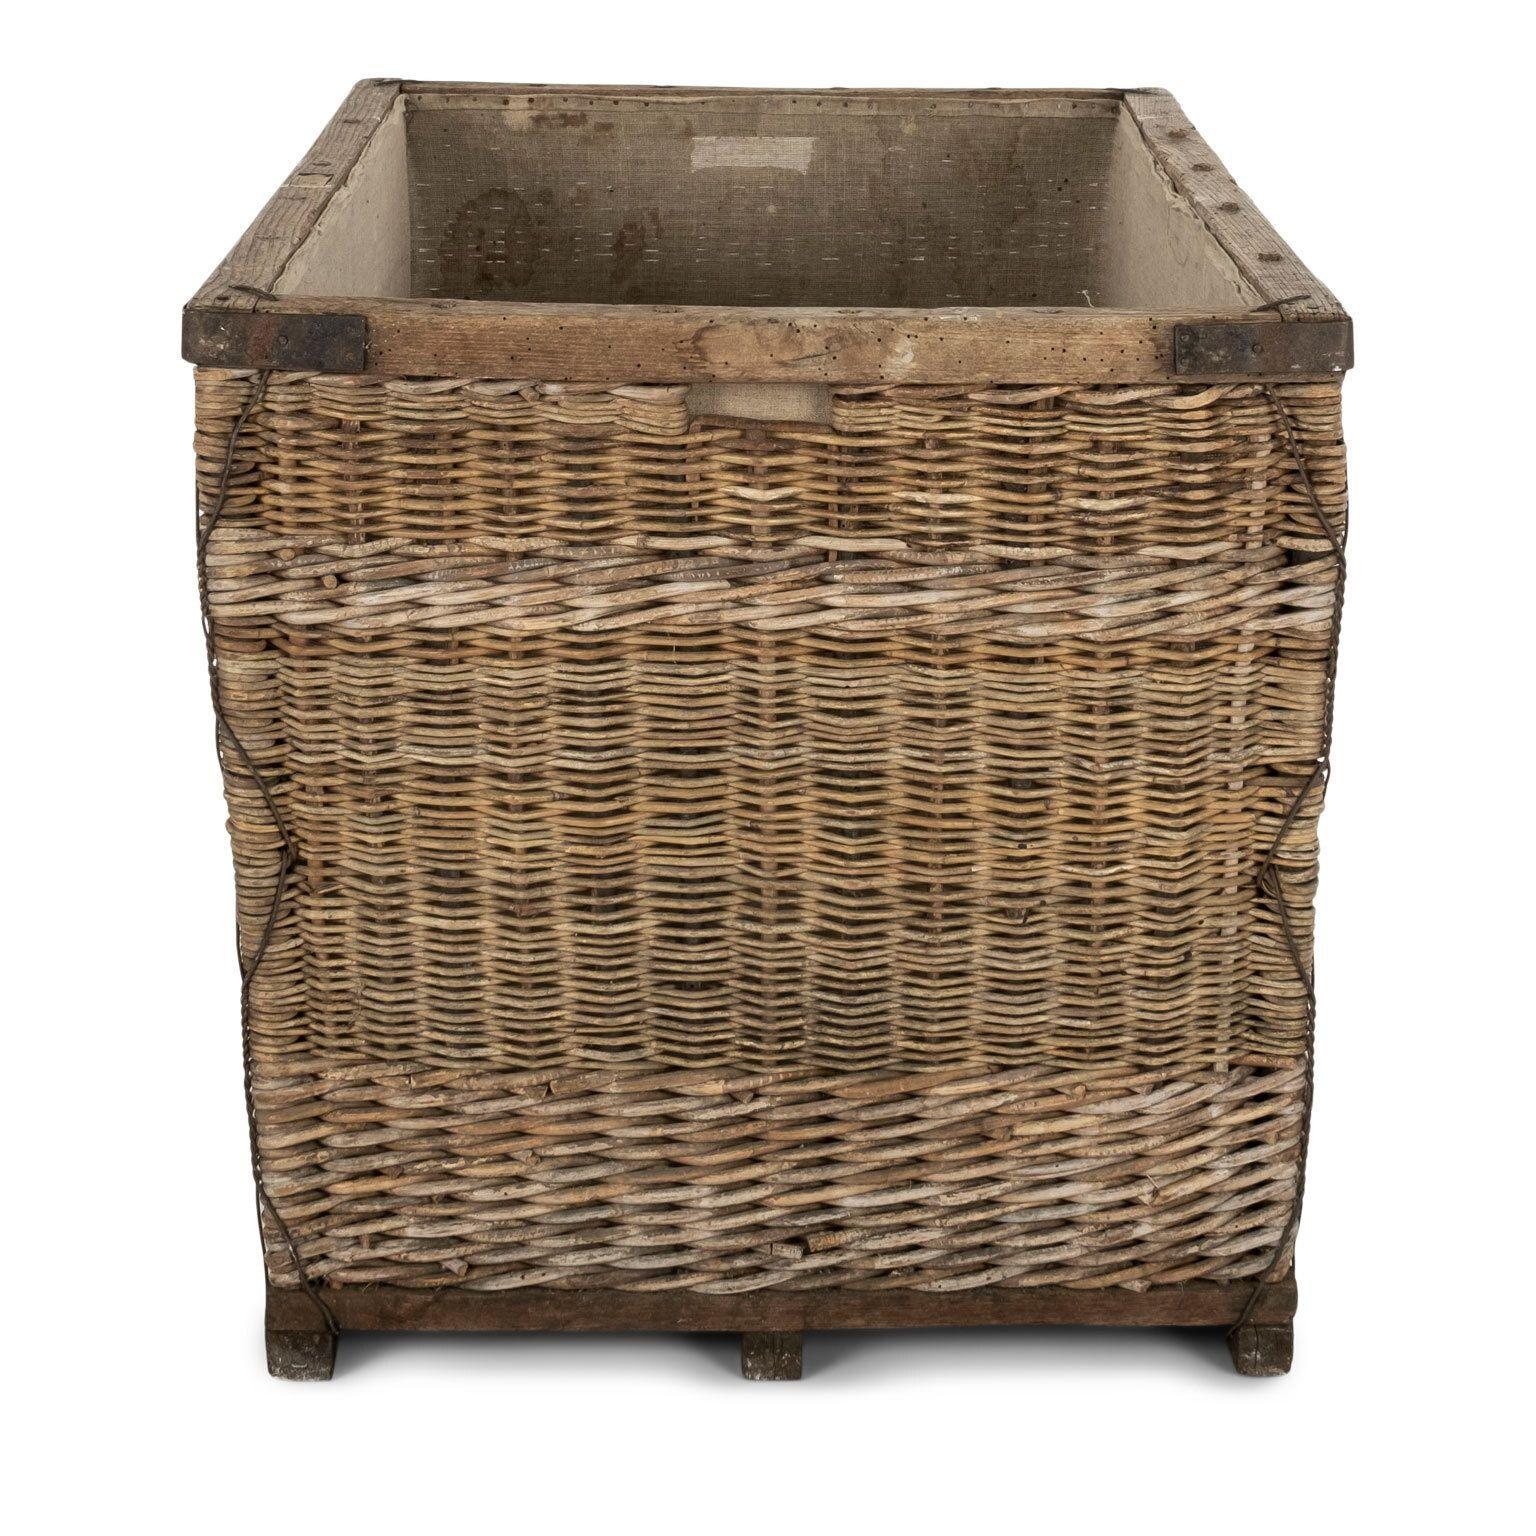 French Provincial Large French Wicker Basket